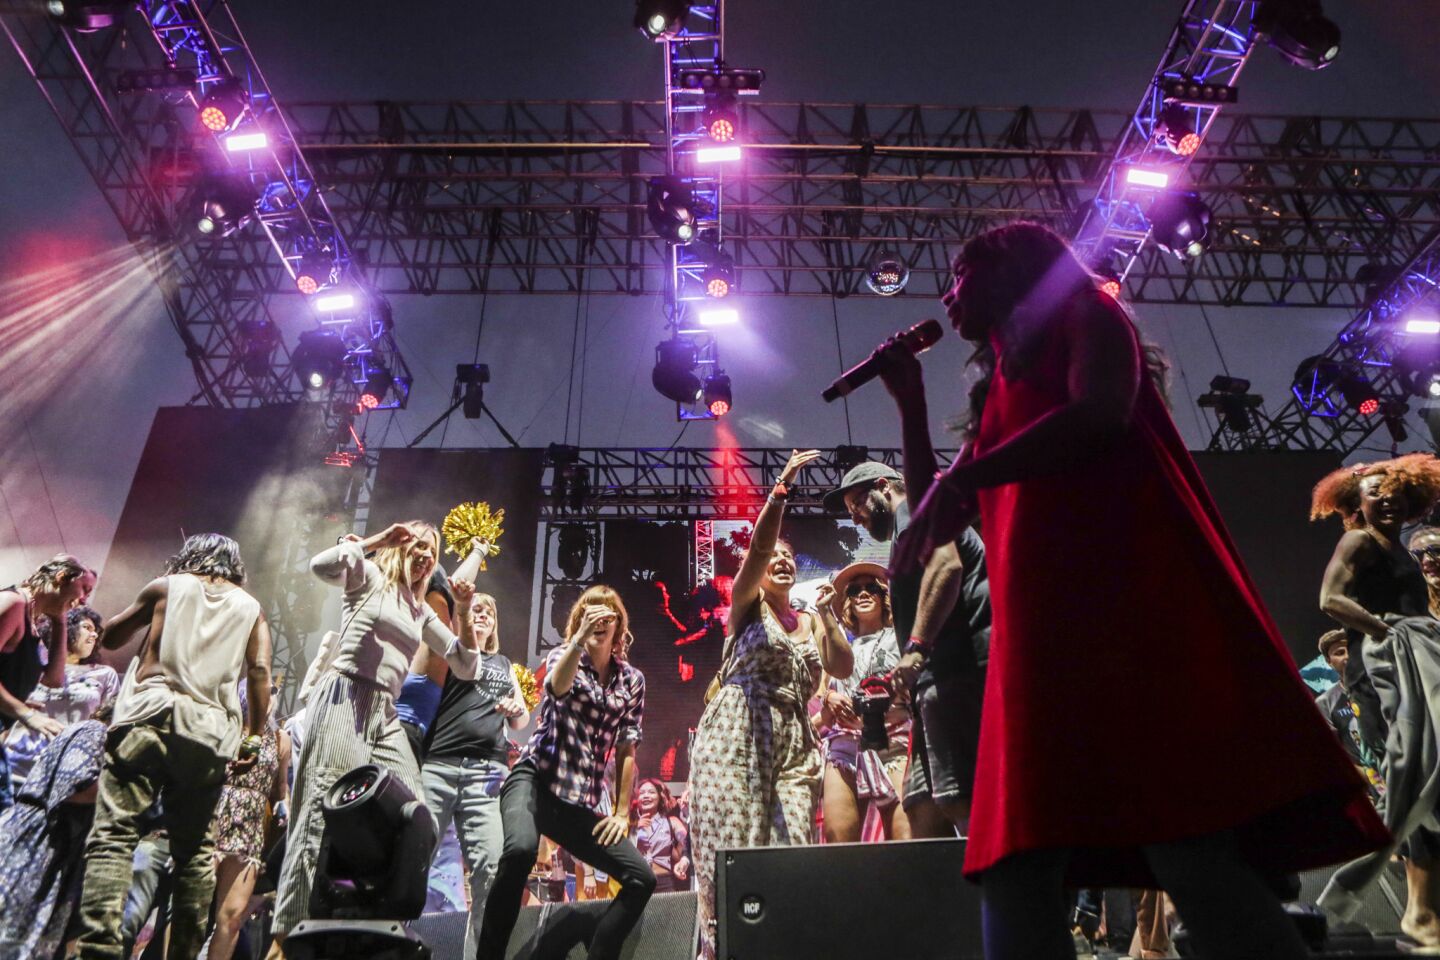 Santigold performs on the Franklin stage with many fans after inviting them to come up and dance with her.